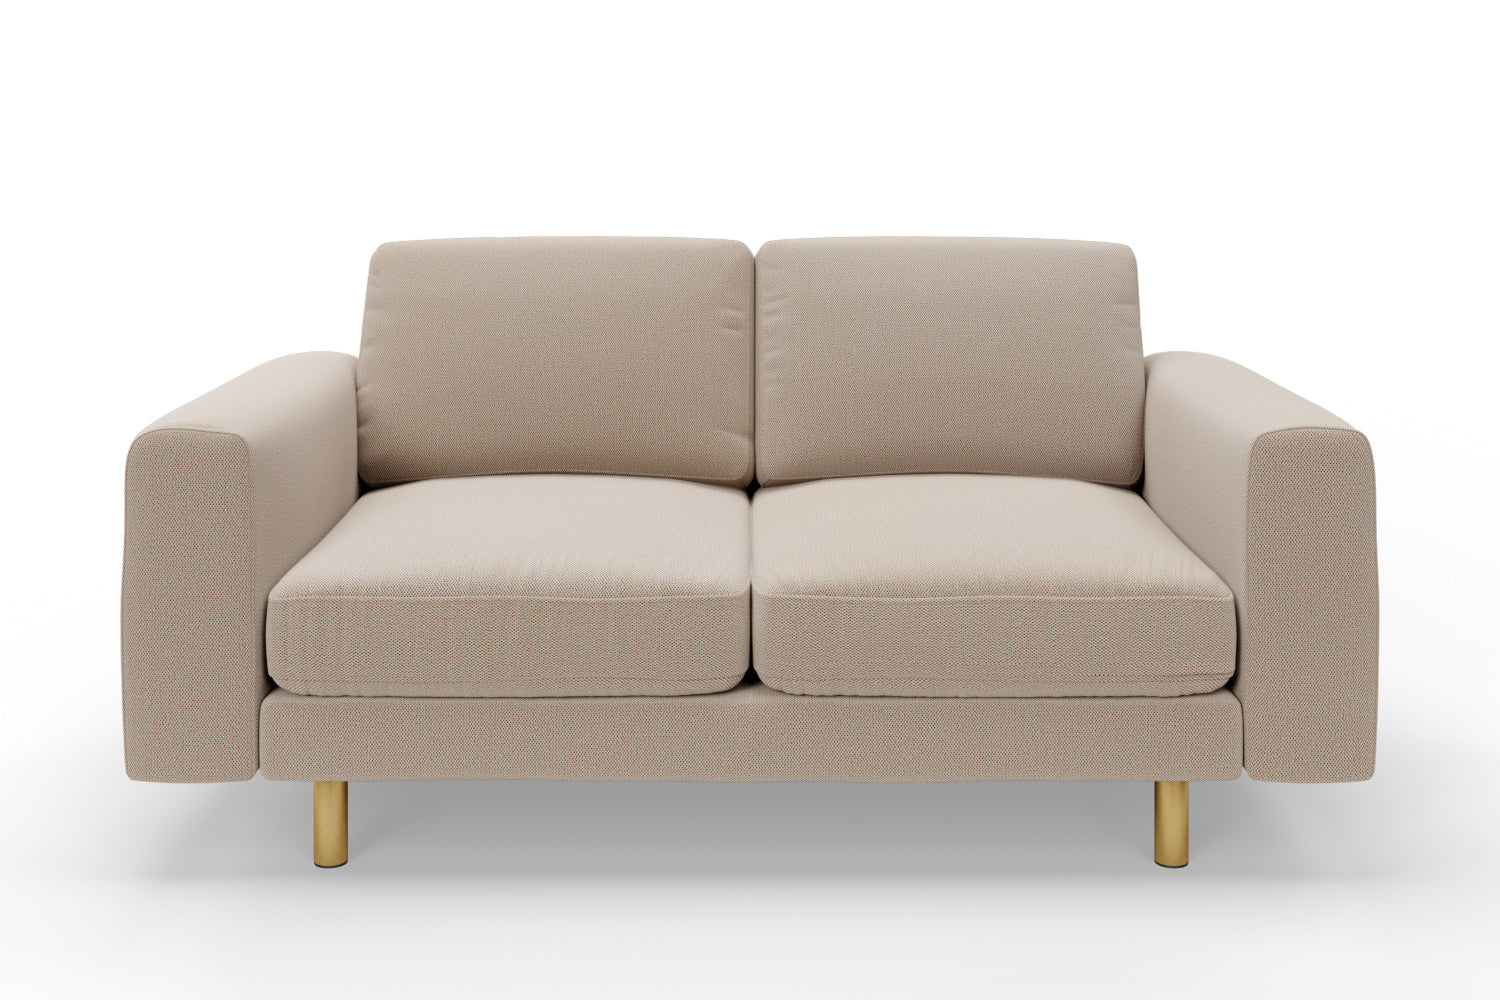 SNUG | The Big Chill 2 Seater Sofa in Oatmeal variant_40414877483056